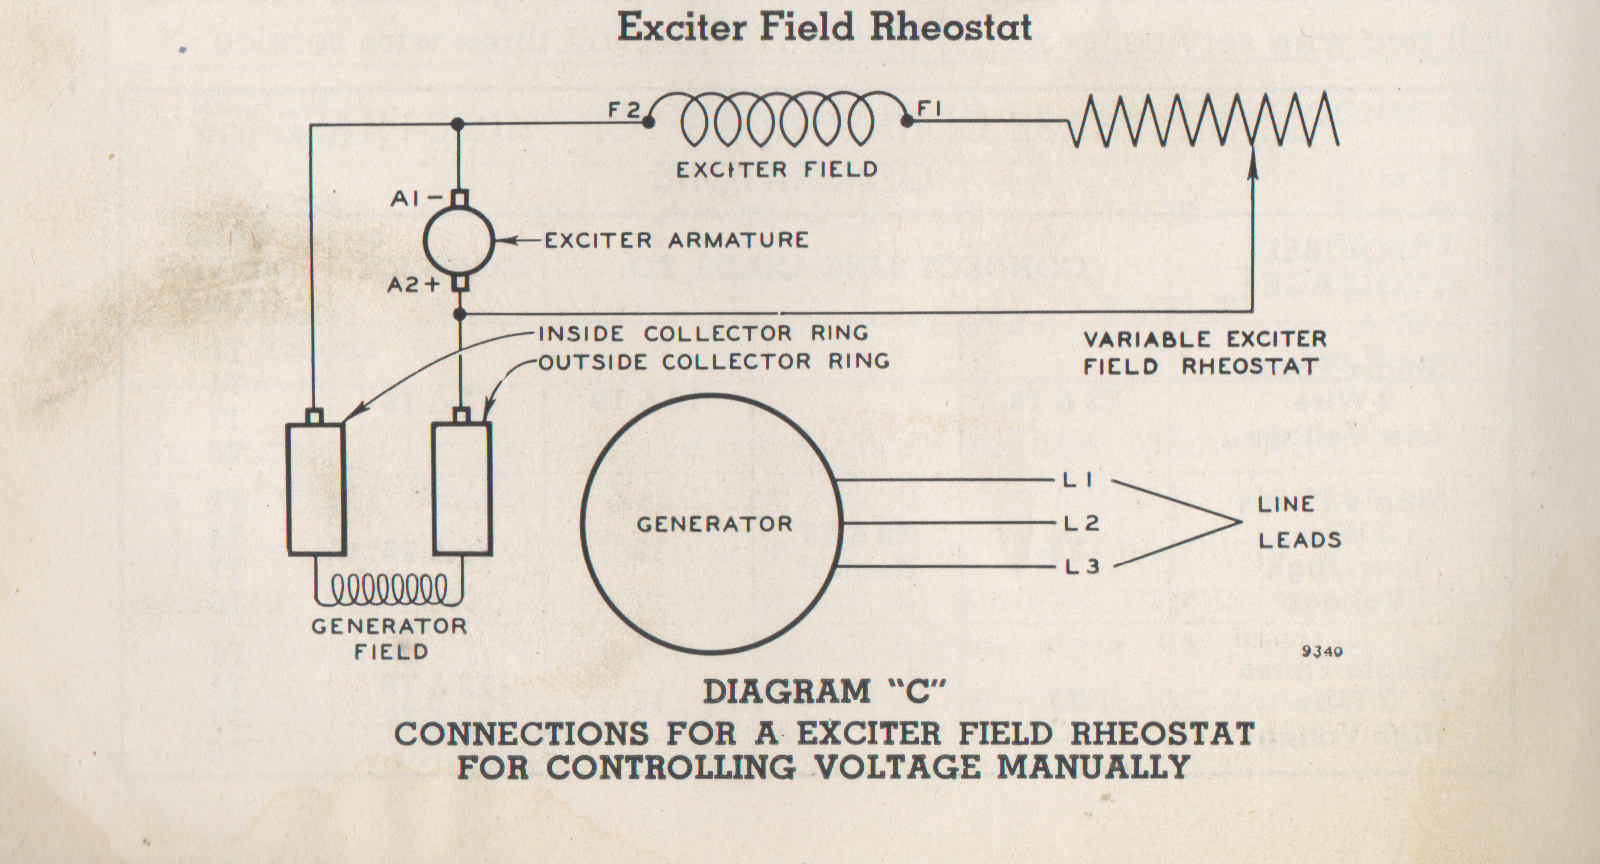 Circuit diagram. Top label: Exciter Field Rheostat. Bottom label: Diagram C. Connections for a exciter field rheostat for controlling voltage manually.